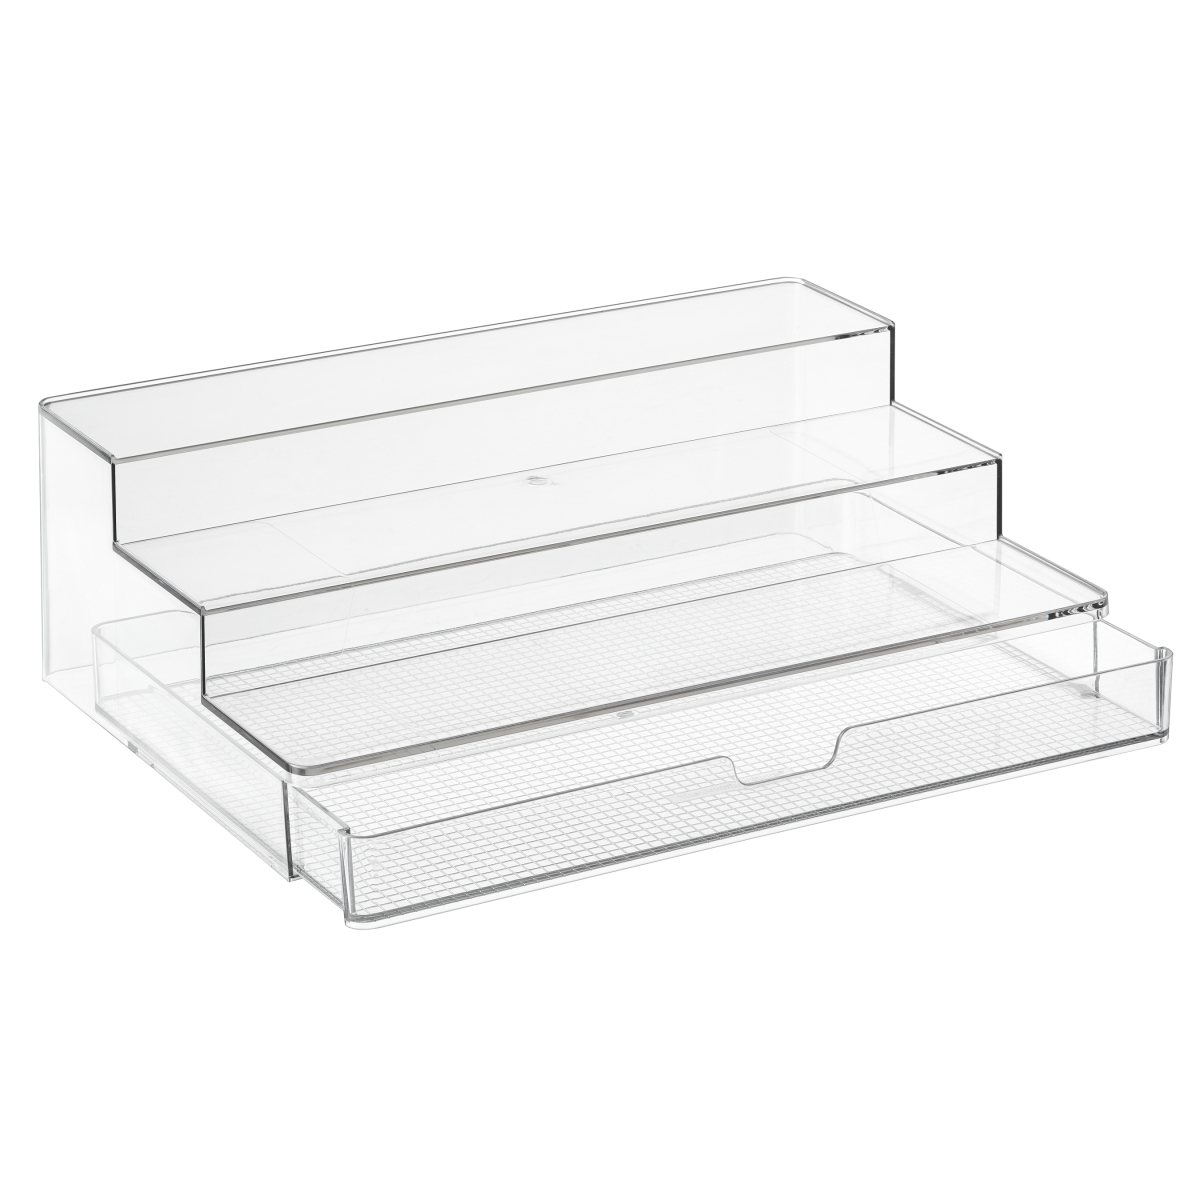 https://www.containerstore.com/catalogimages/475408/10090077-3-tier-drawered-organizer-l.jpg